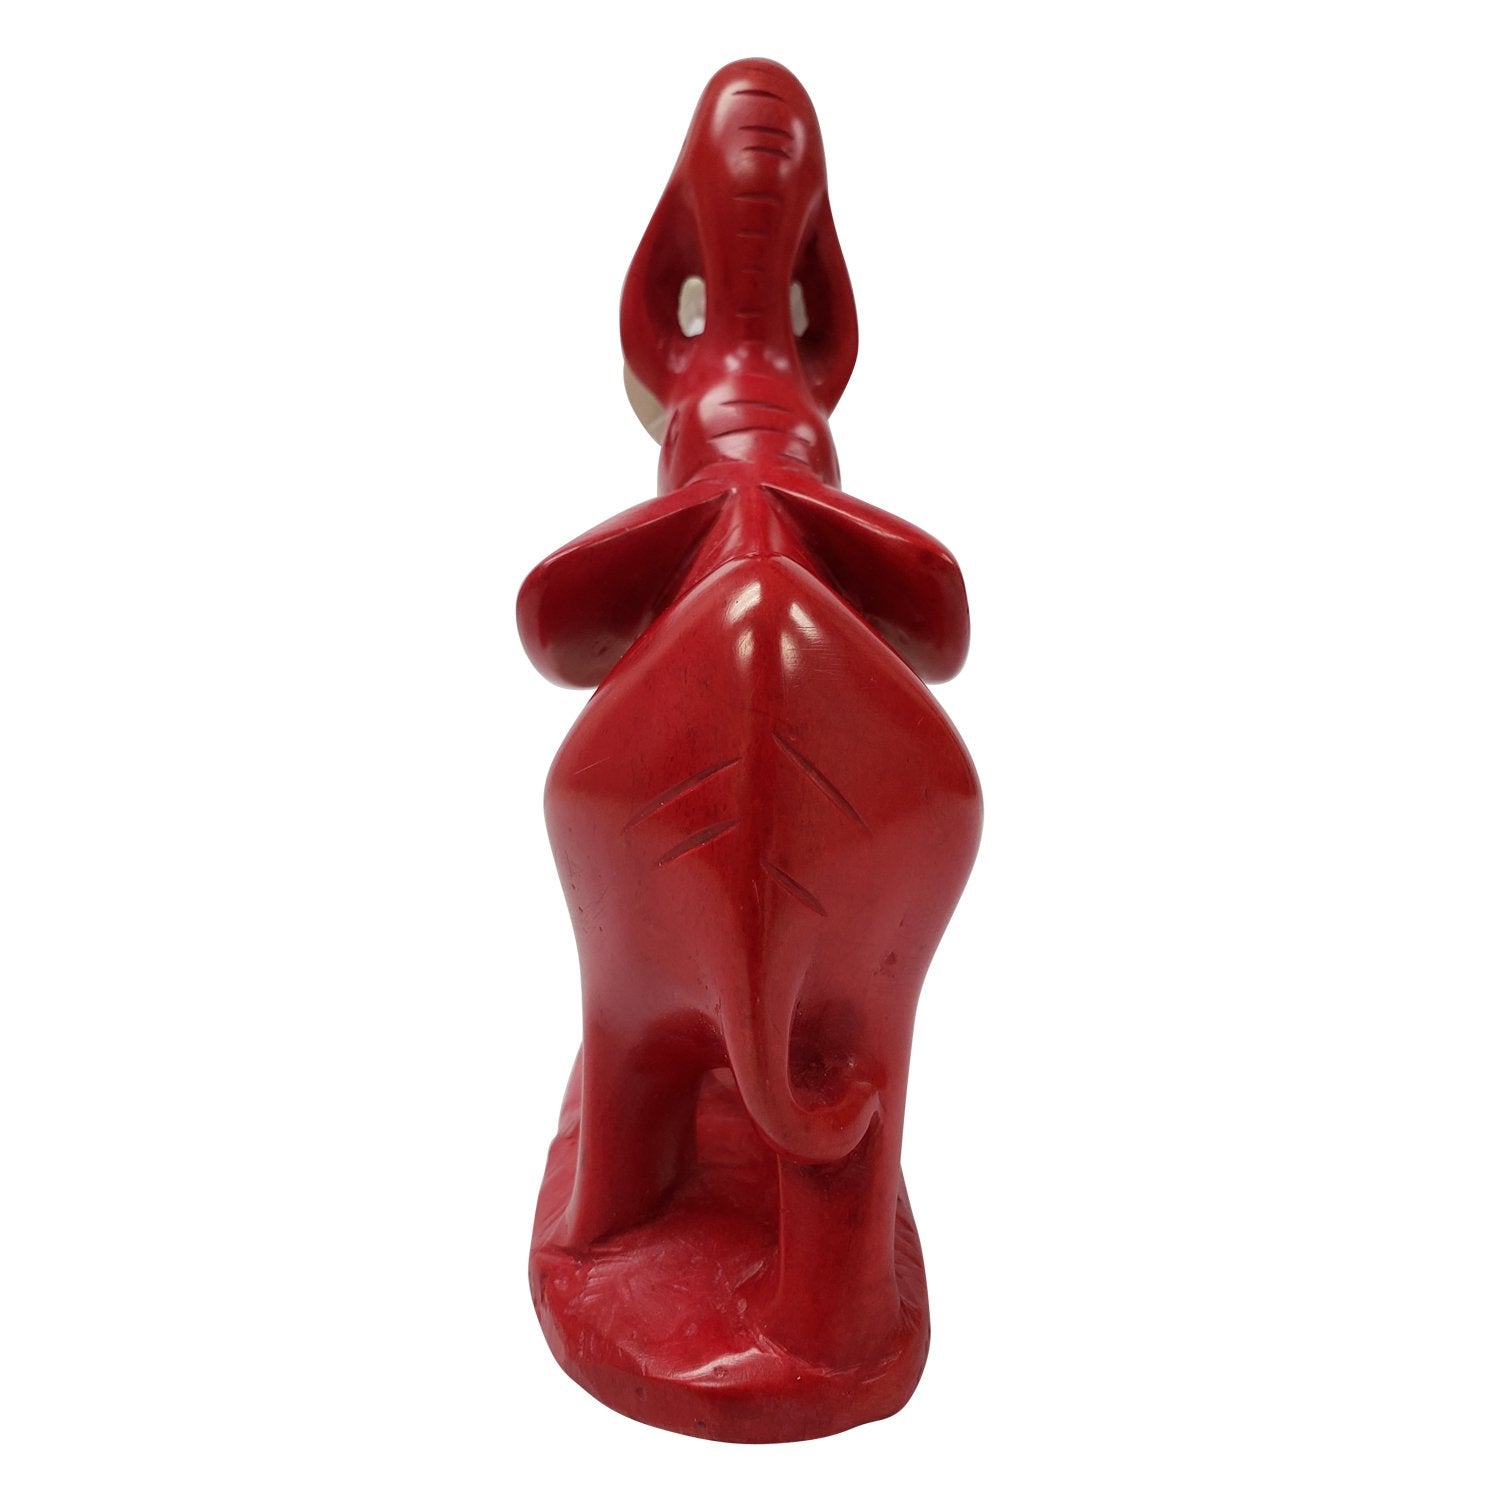 3 of 4: Authentic African Handmade Soapstone Red & White Elephant Figurine